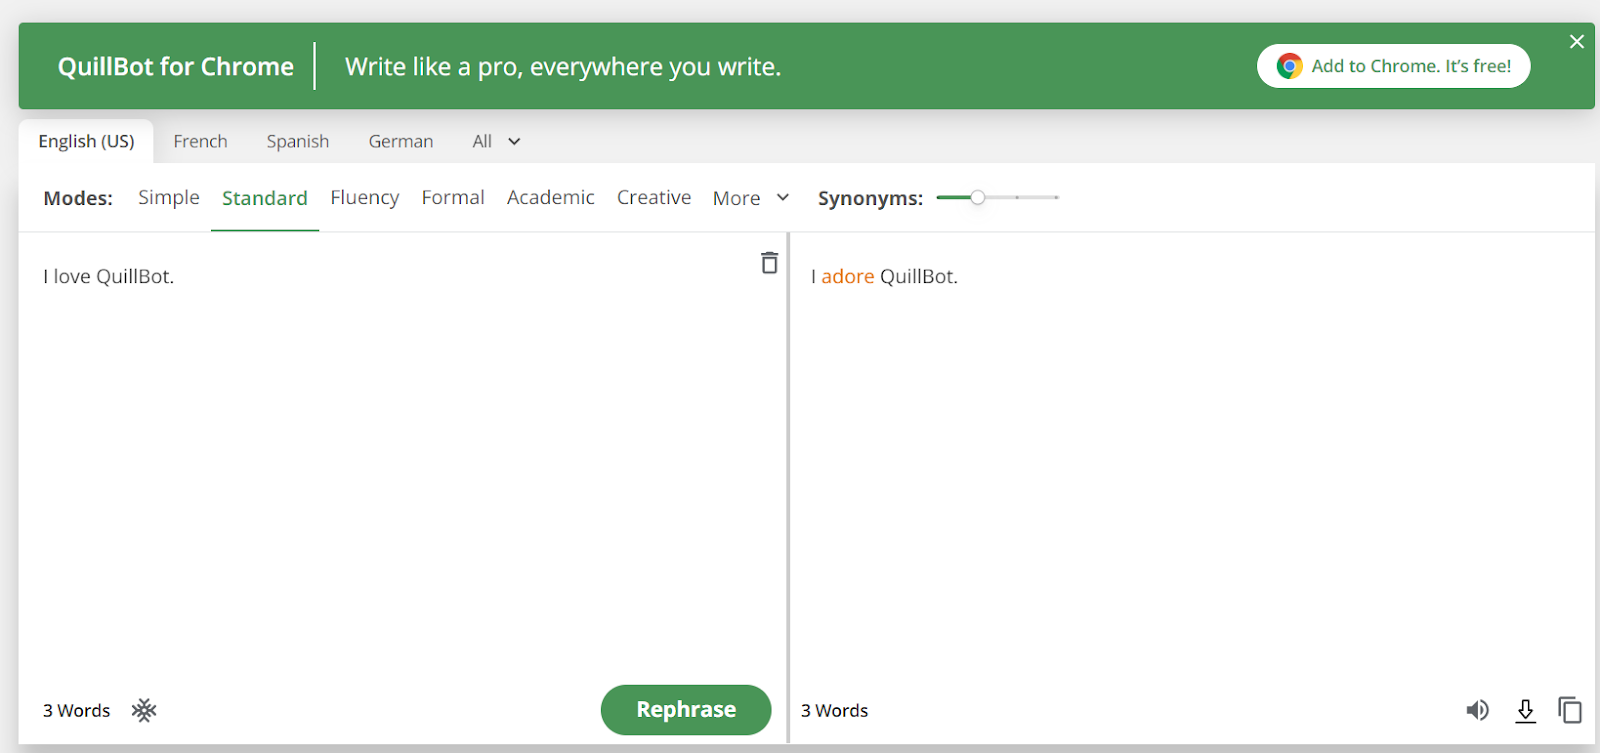 The Paraphraser Tool from Quillbot